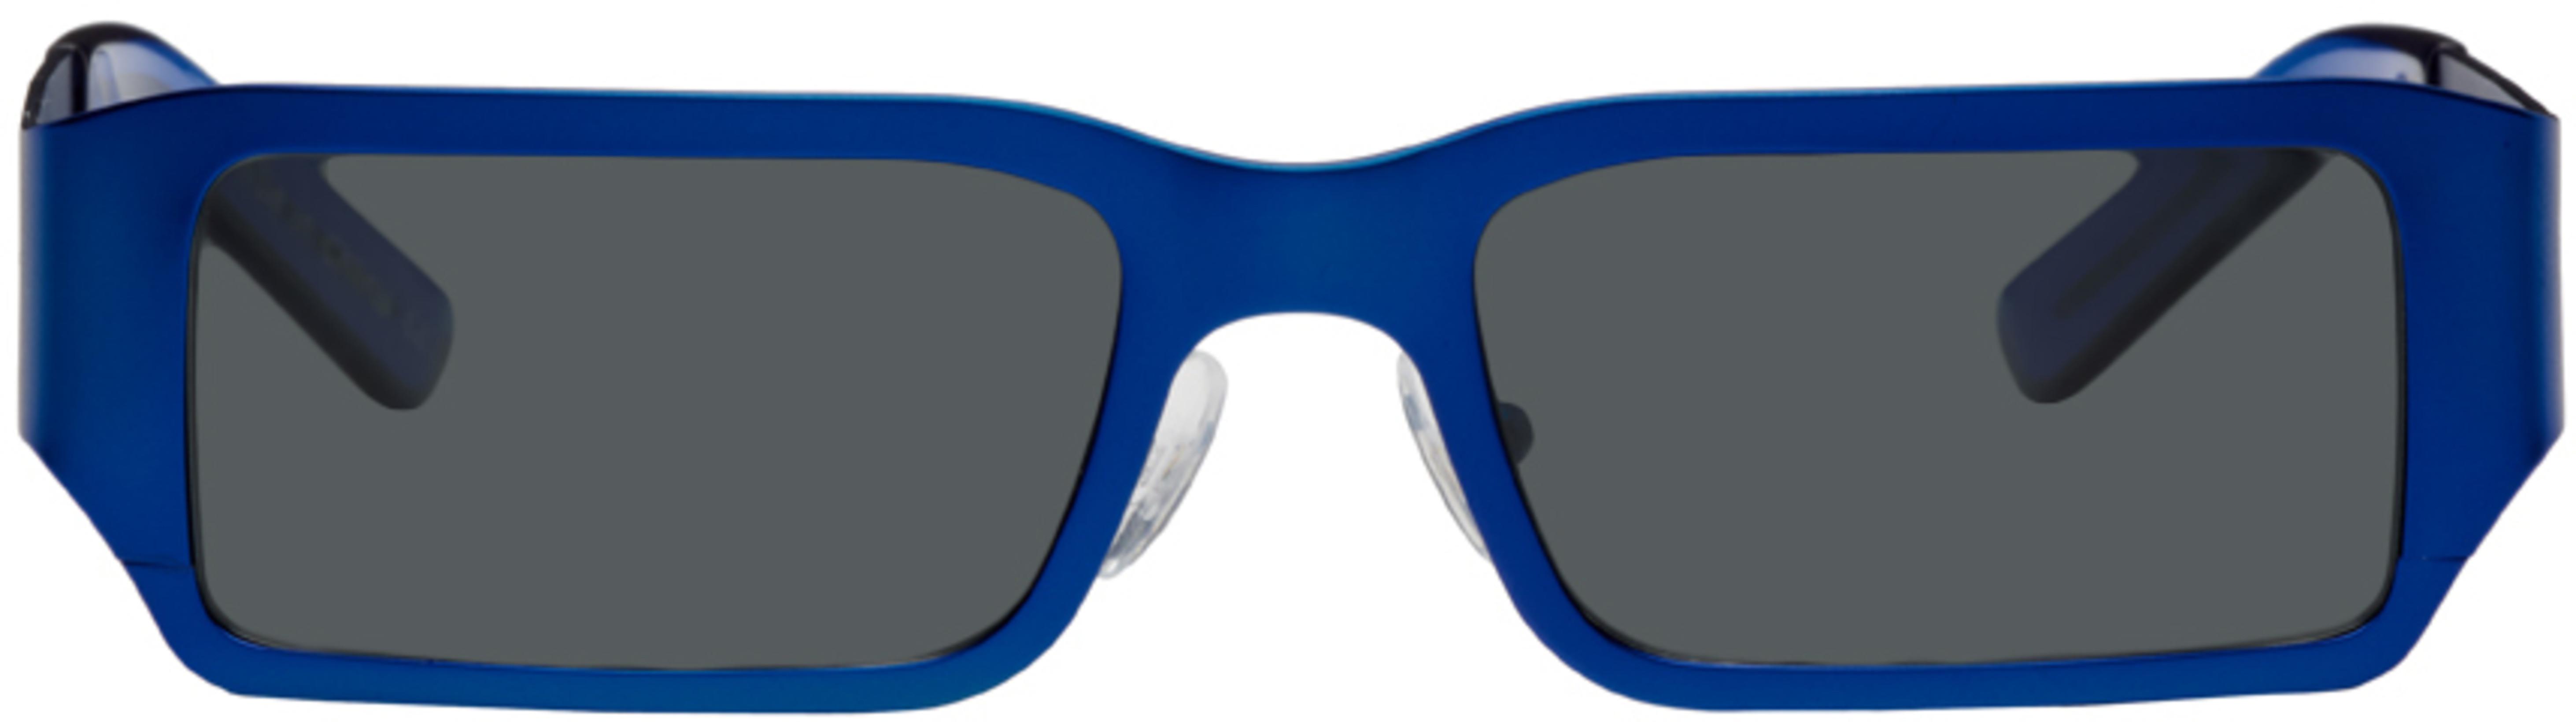 Blue Pollux Sunglasses by A BETTER FEELING